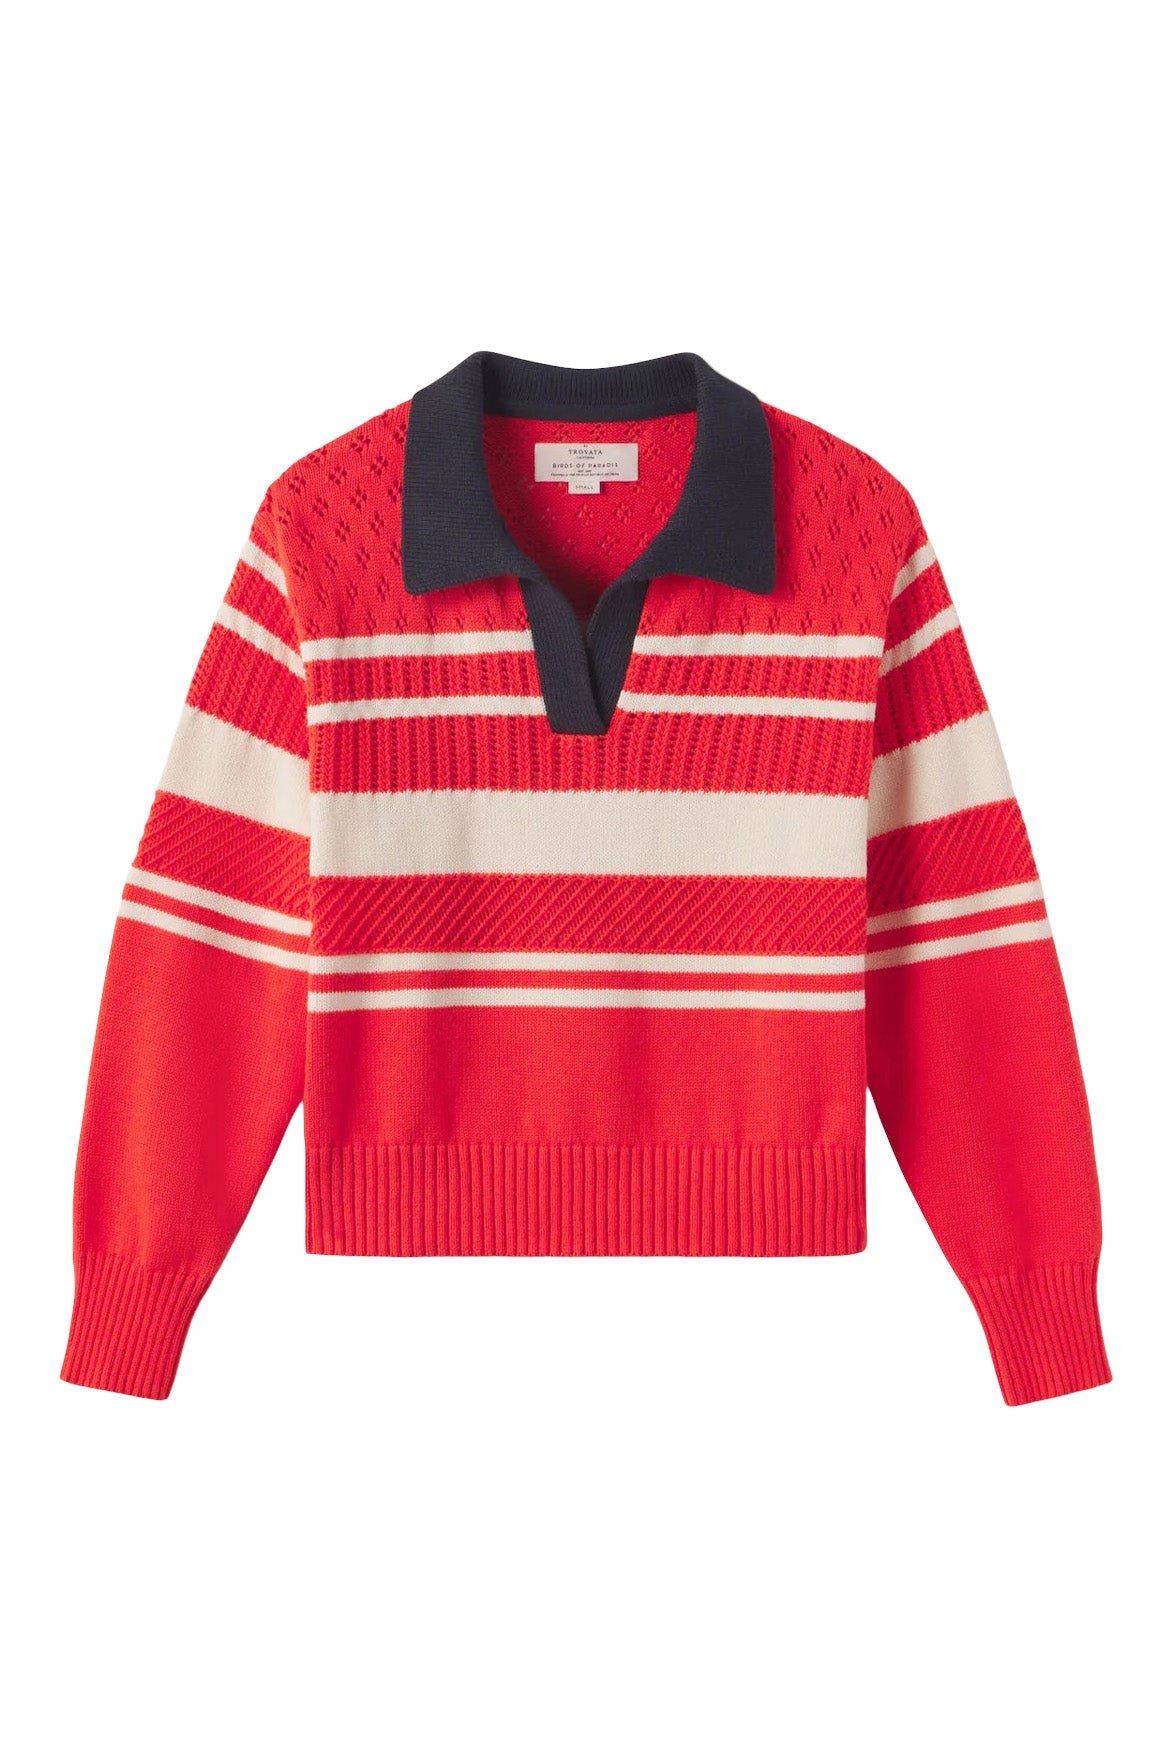 Trovata Birds of Paradis Parker Polo Sweater in Red